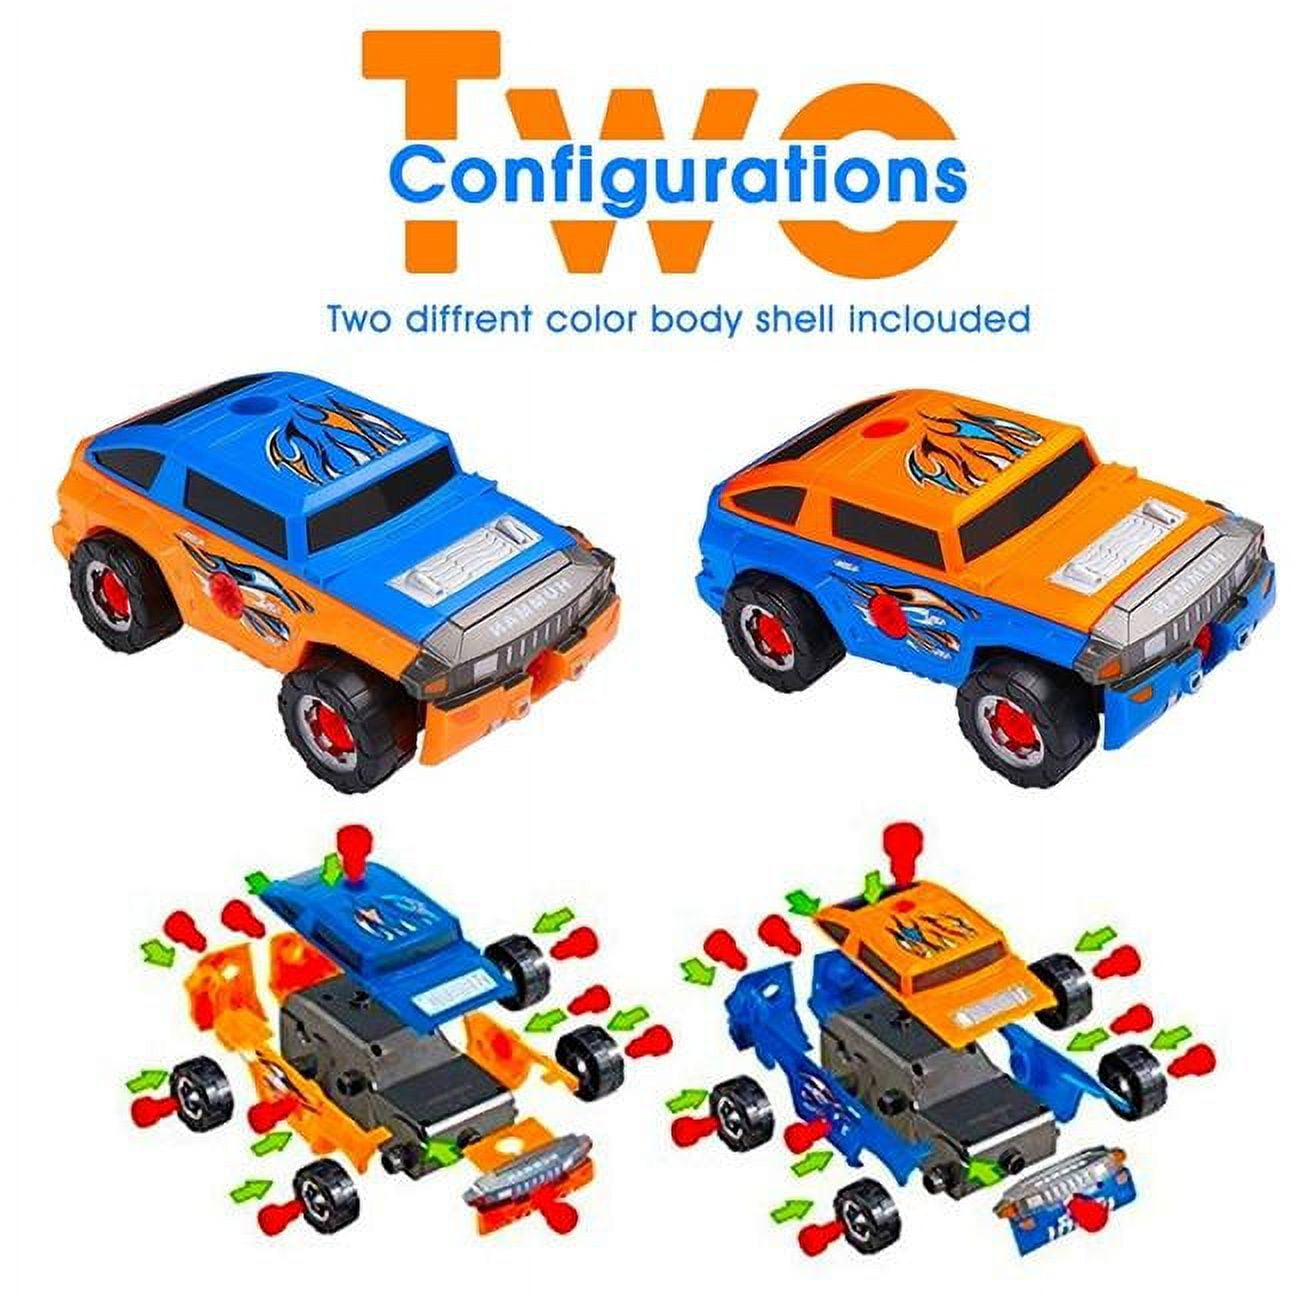 Ps190 Build Your Vehicle Racing Cars Project Gift Kit Present For Toddlers